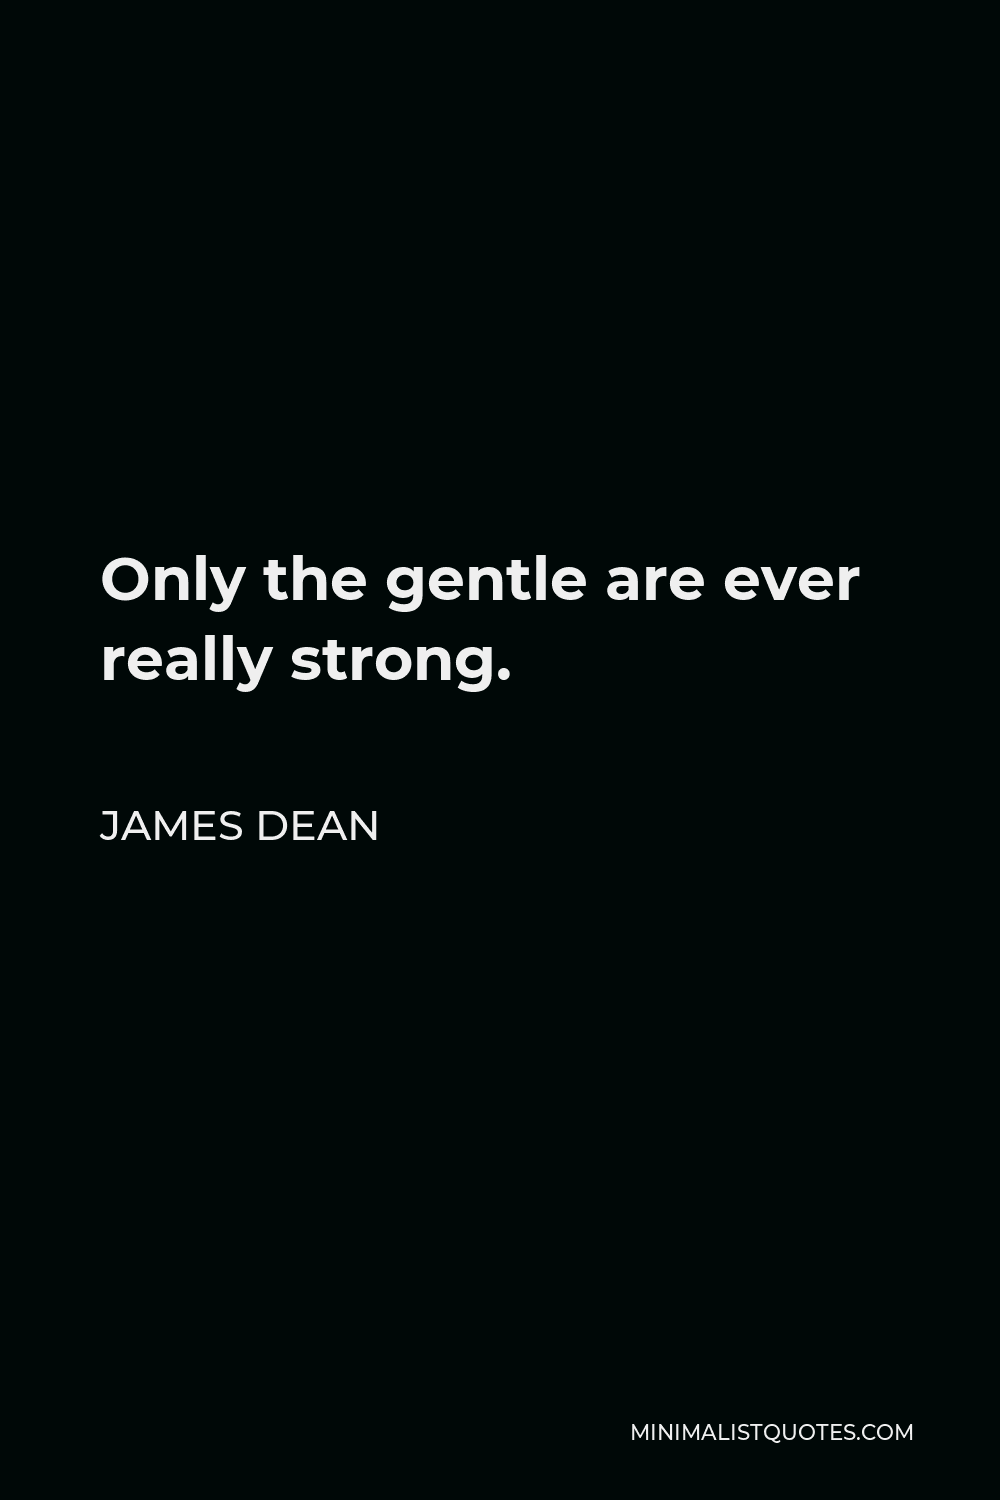 James Dean Quote - Only the gentle are ever really strong.